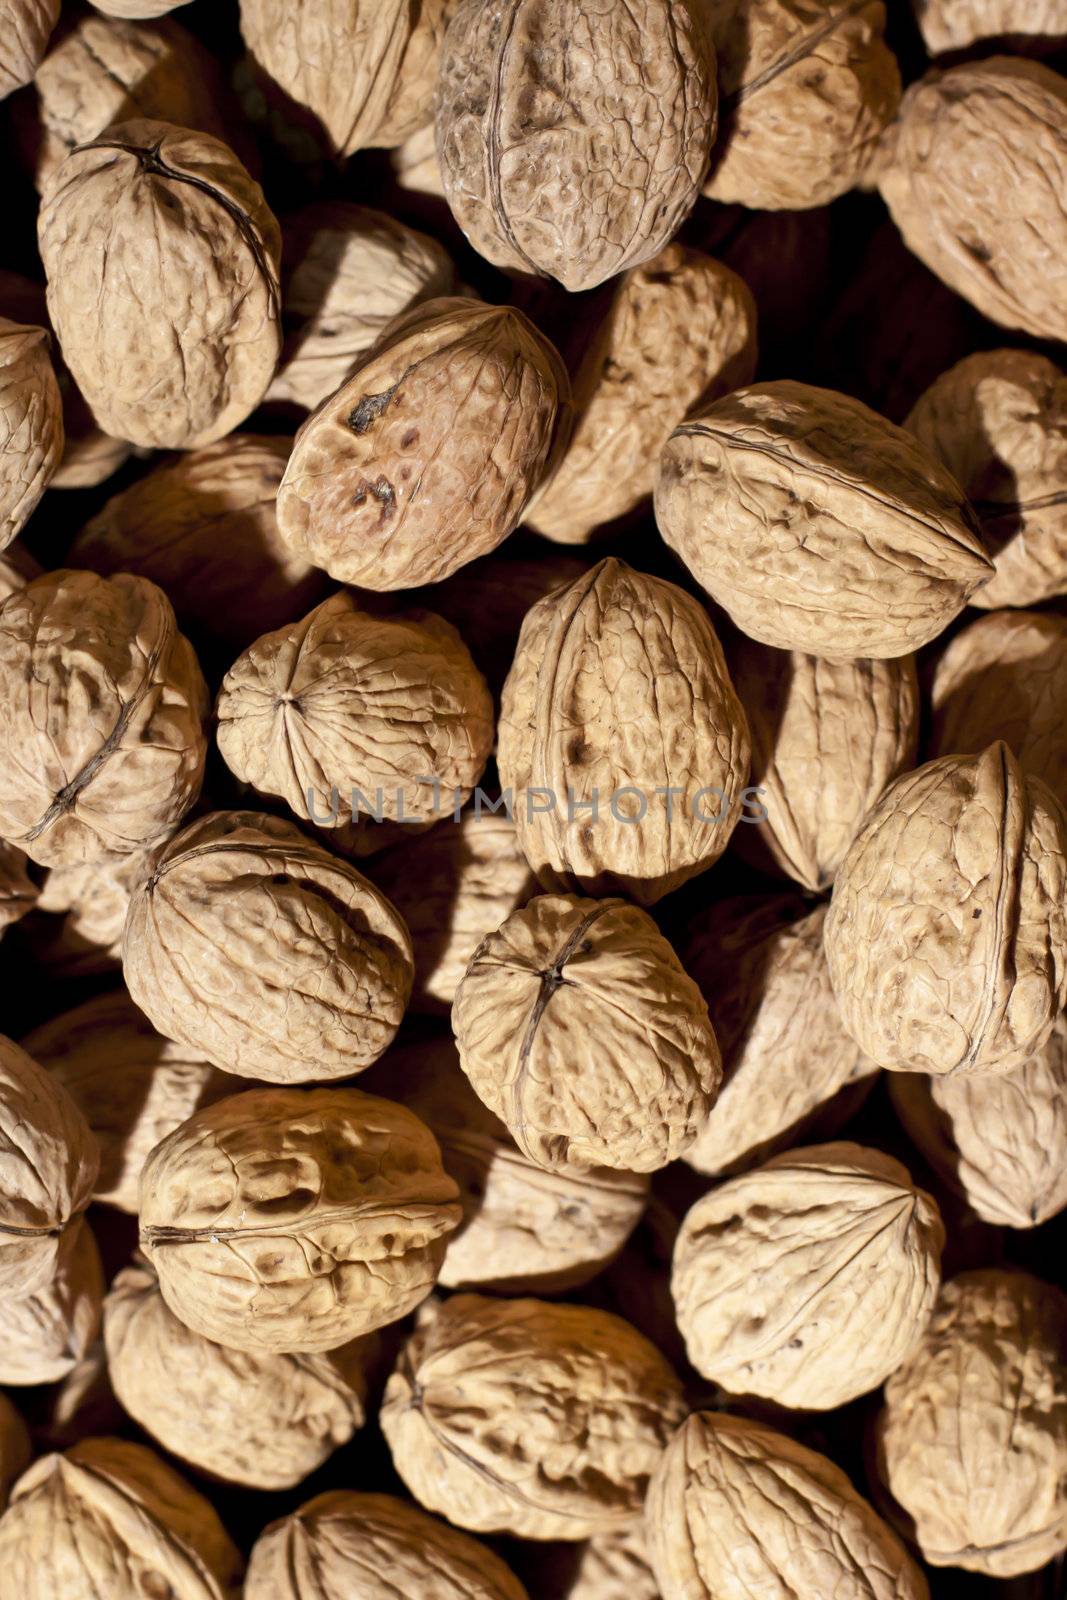 Brown dry walnuts in their wooden shells.